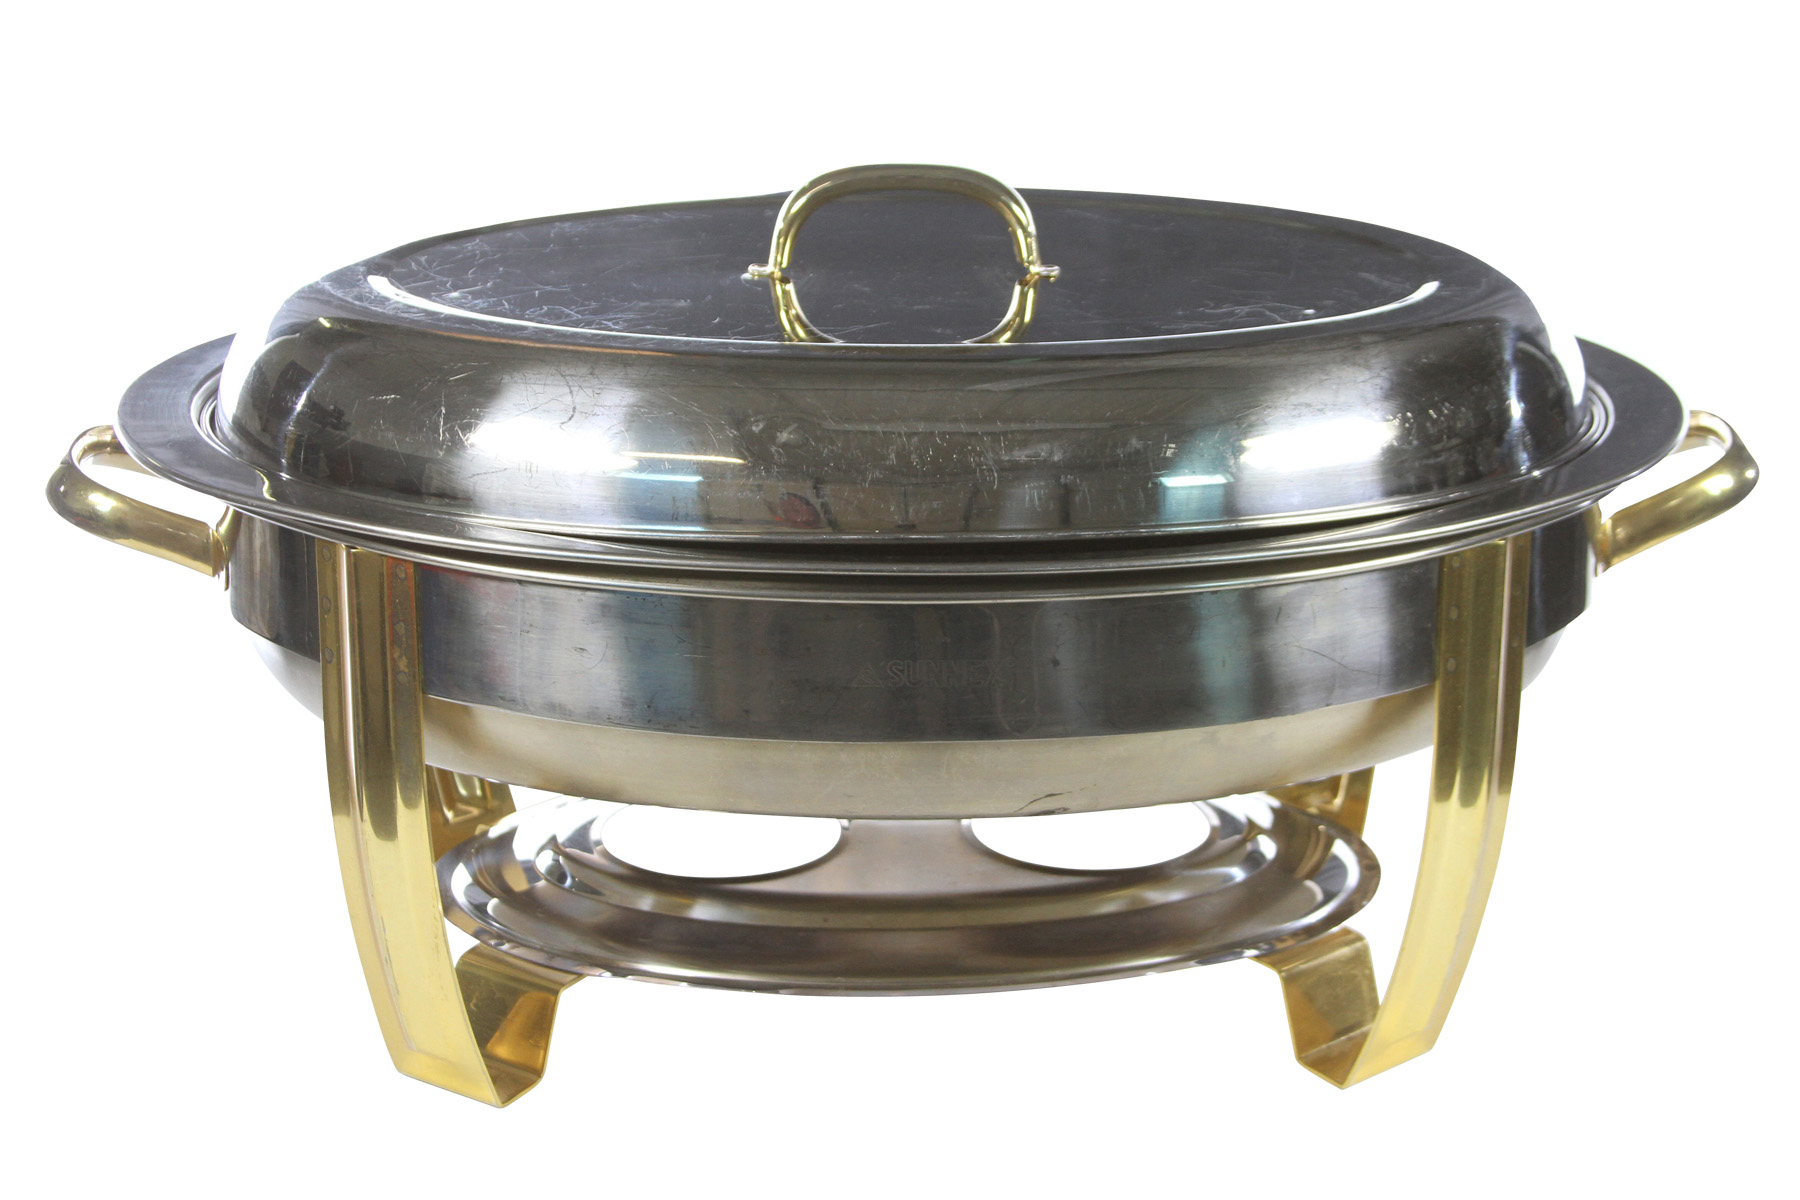 8 Quart Oval Chafer Deluxe